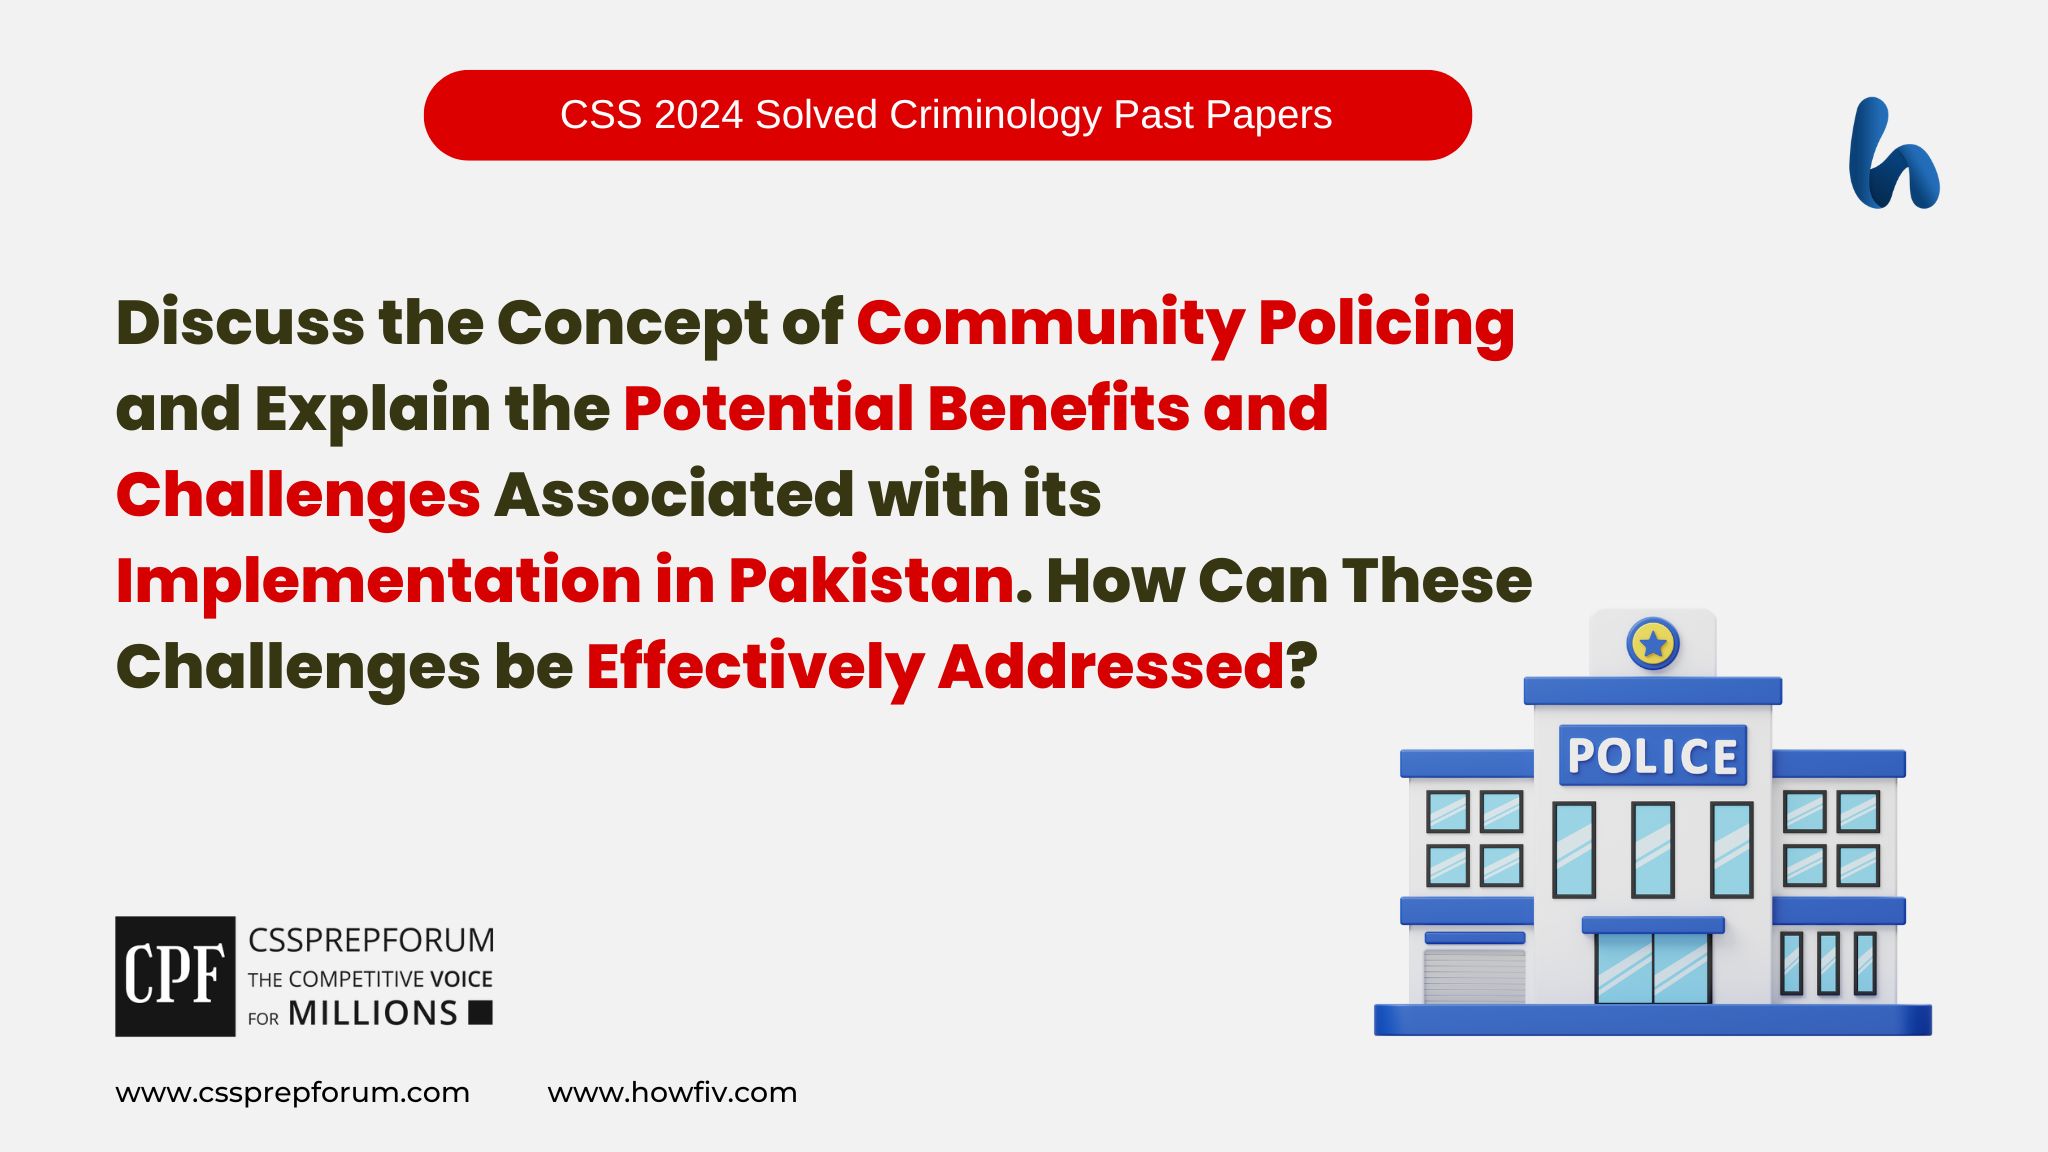 Discuss the Concept of Community Policing and Explain the Potential Benefits and Challenges Associated with its Implementation in Pakistan. How Can These Challenges be Effectively Addressed?